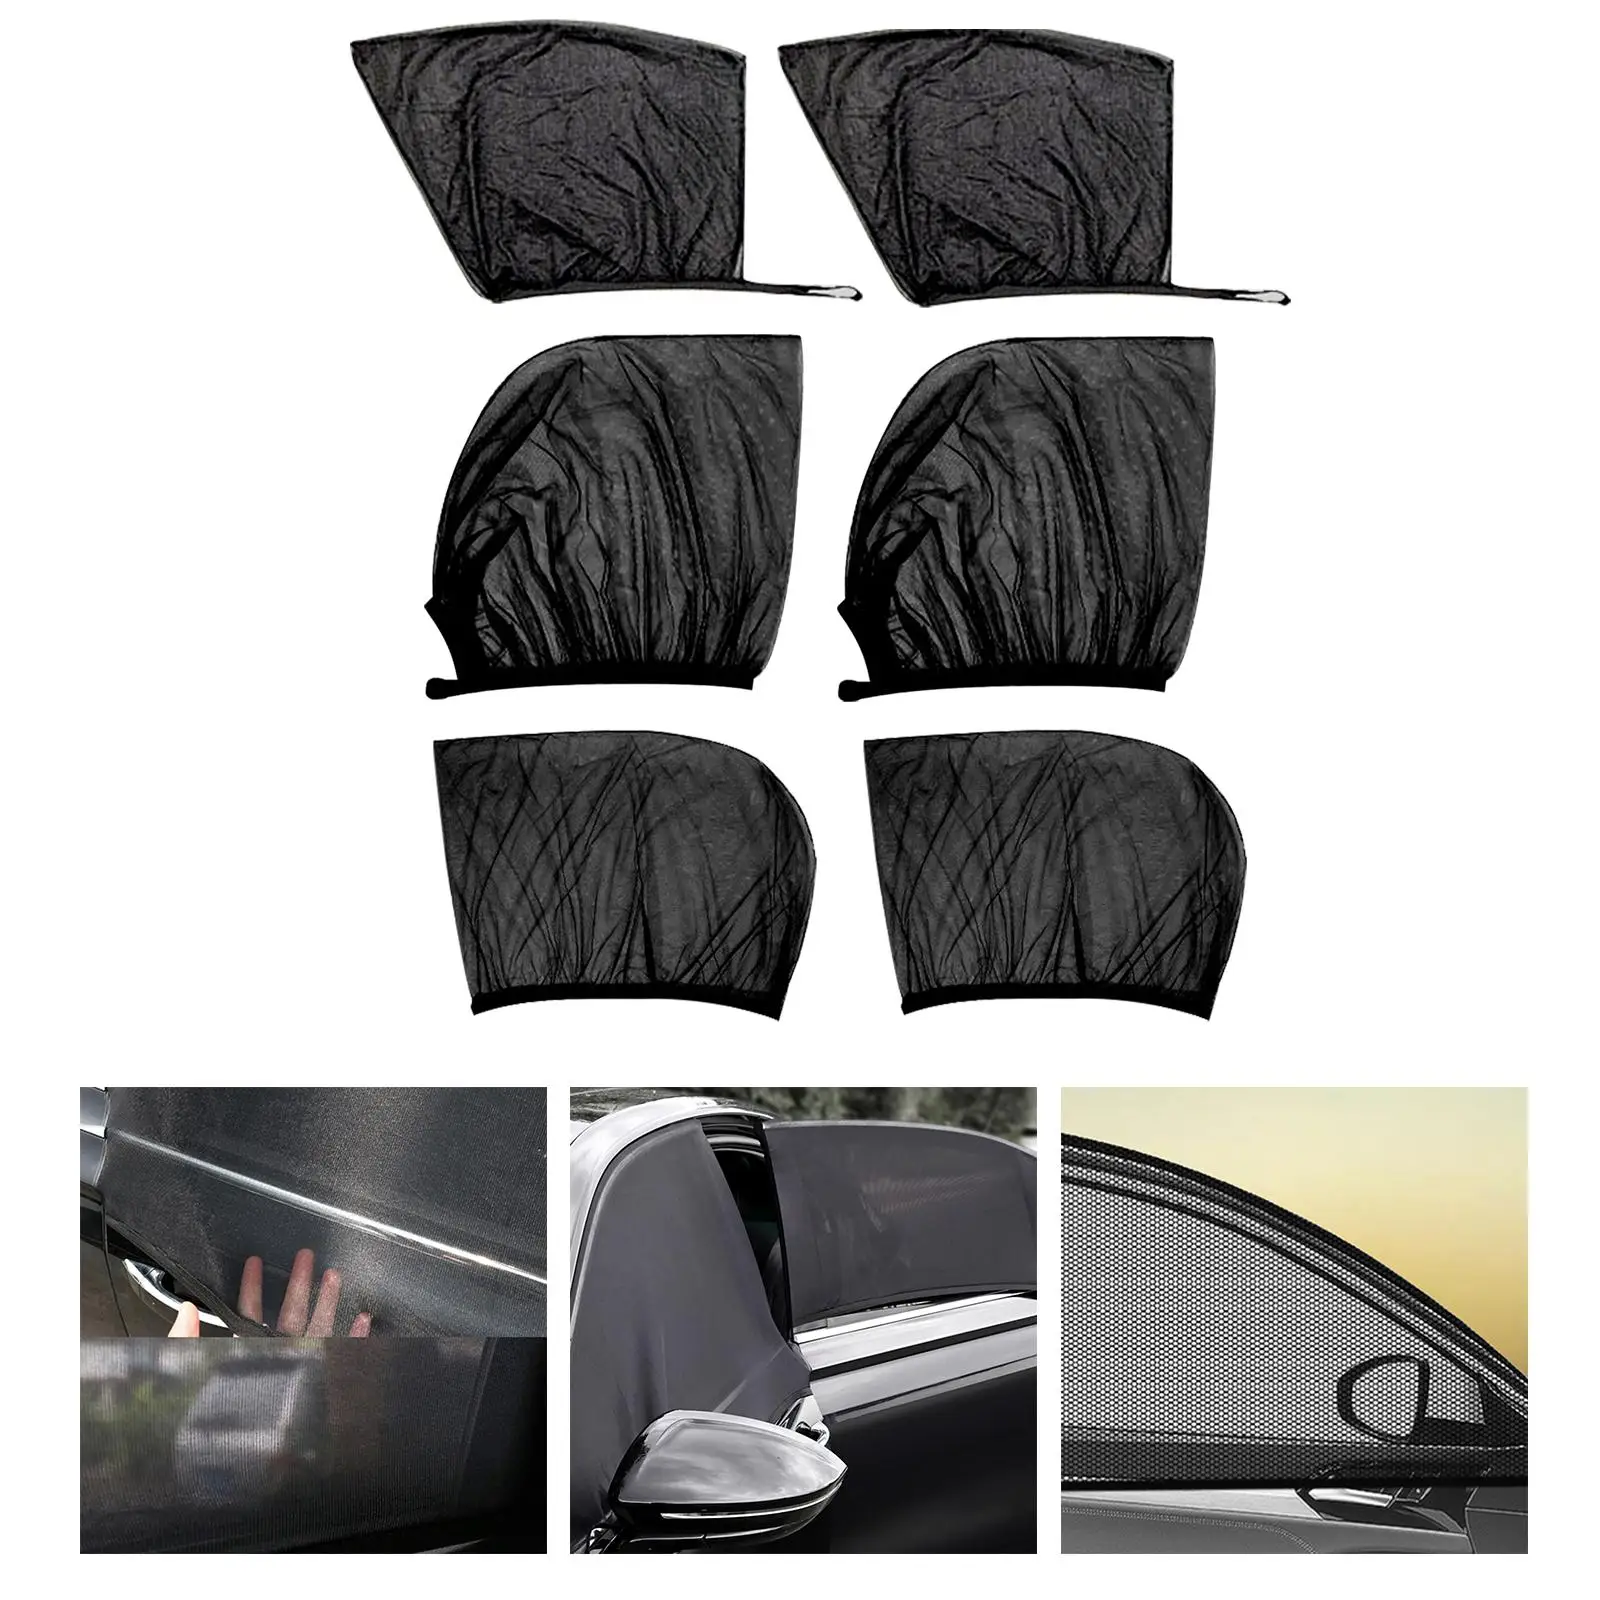 Car Window Shades Breathable Stretchy Mesh Sun Blocking Blackout Covers for Camping